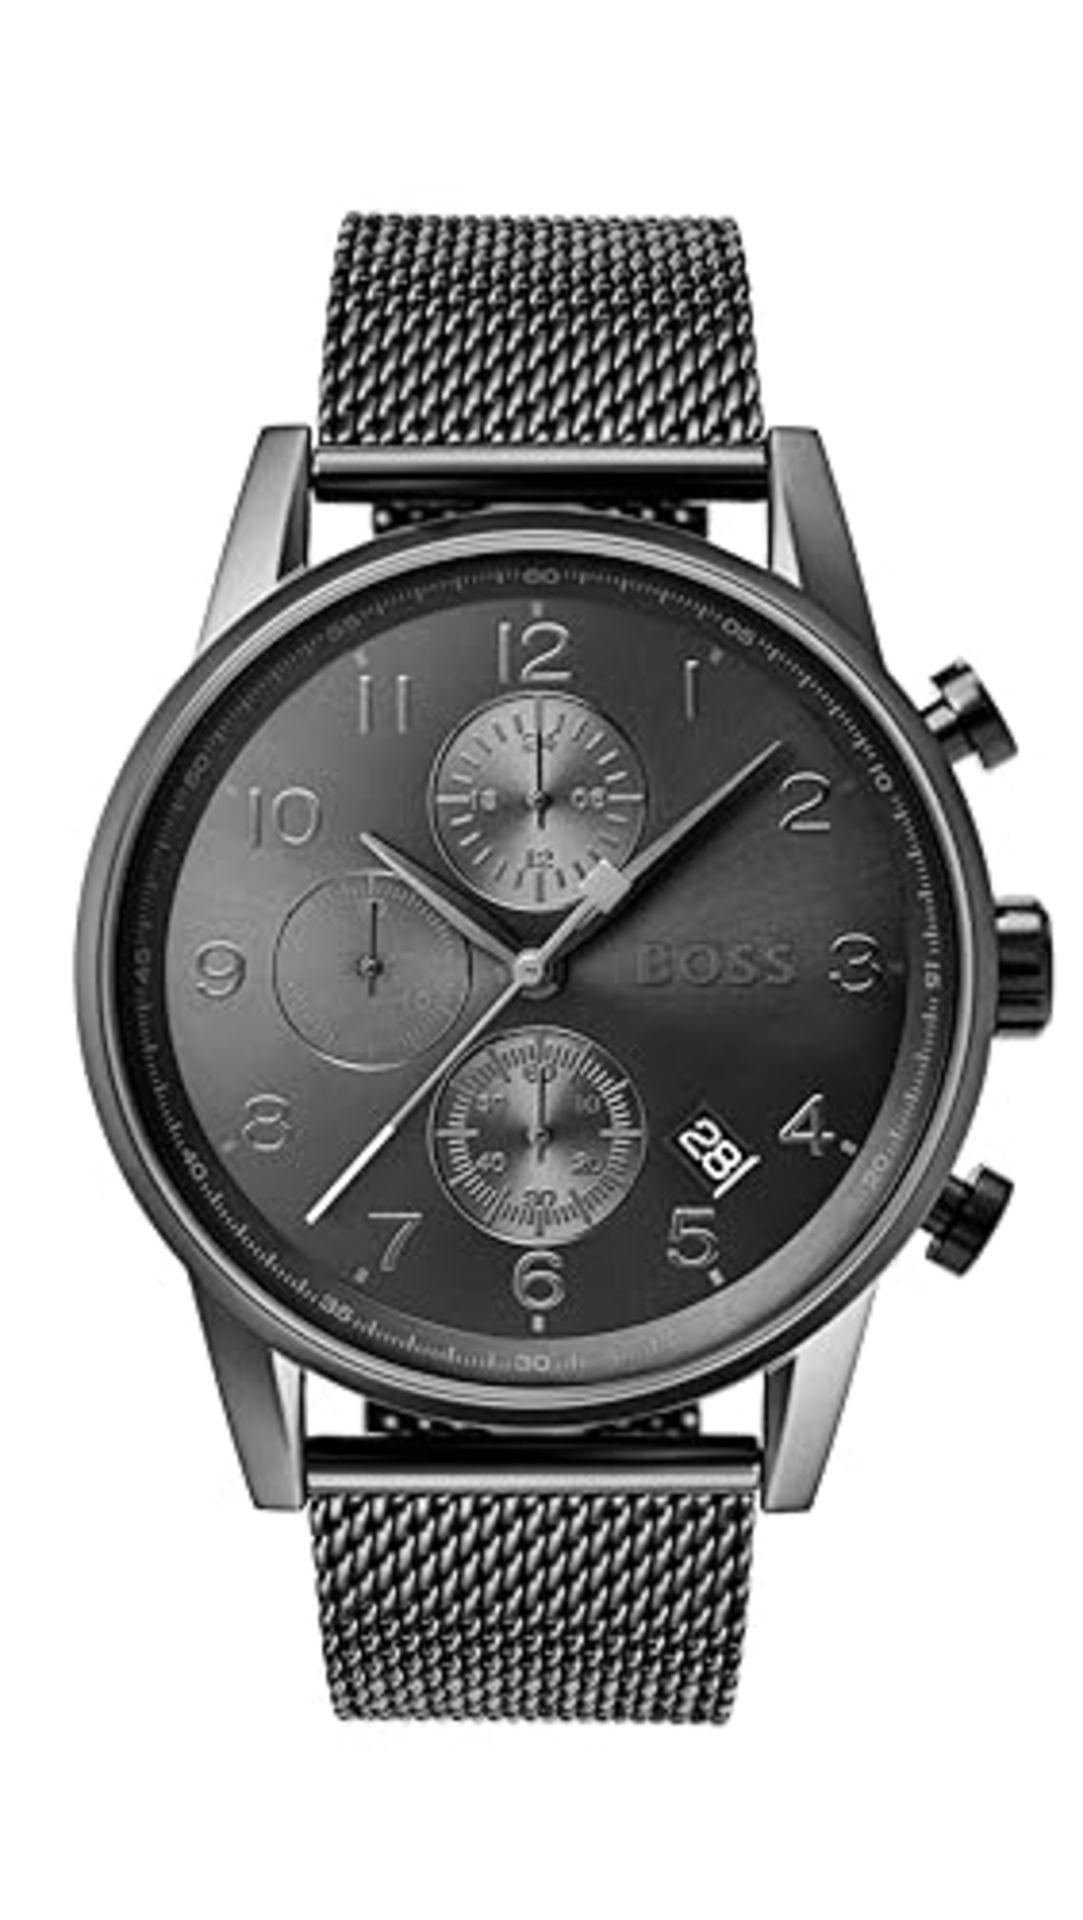 RRP £308.00 BOSS Quartz Chronograph Watch for Men with Gray Stainless Steel Milanese Bracelet - 15